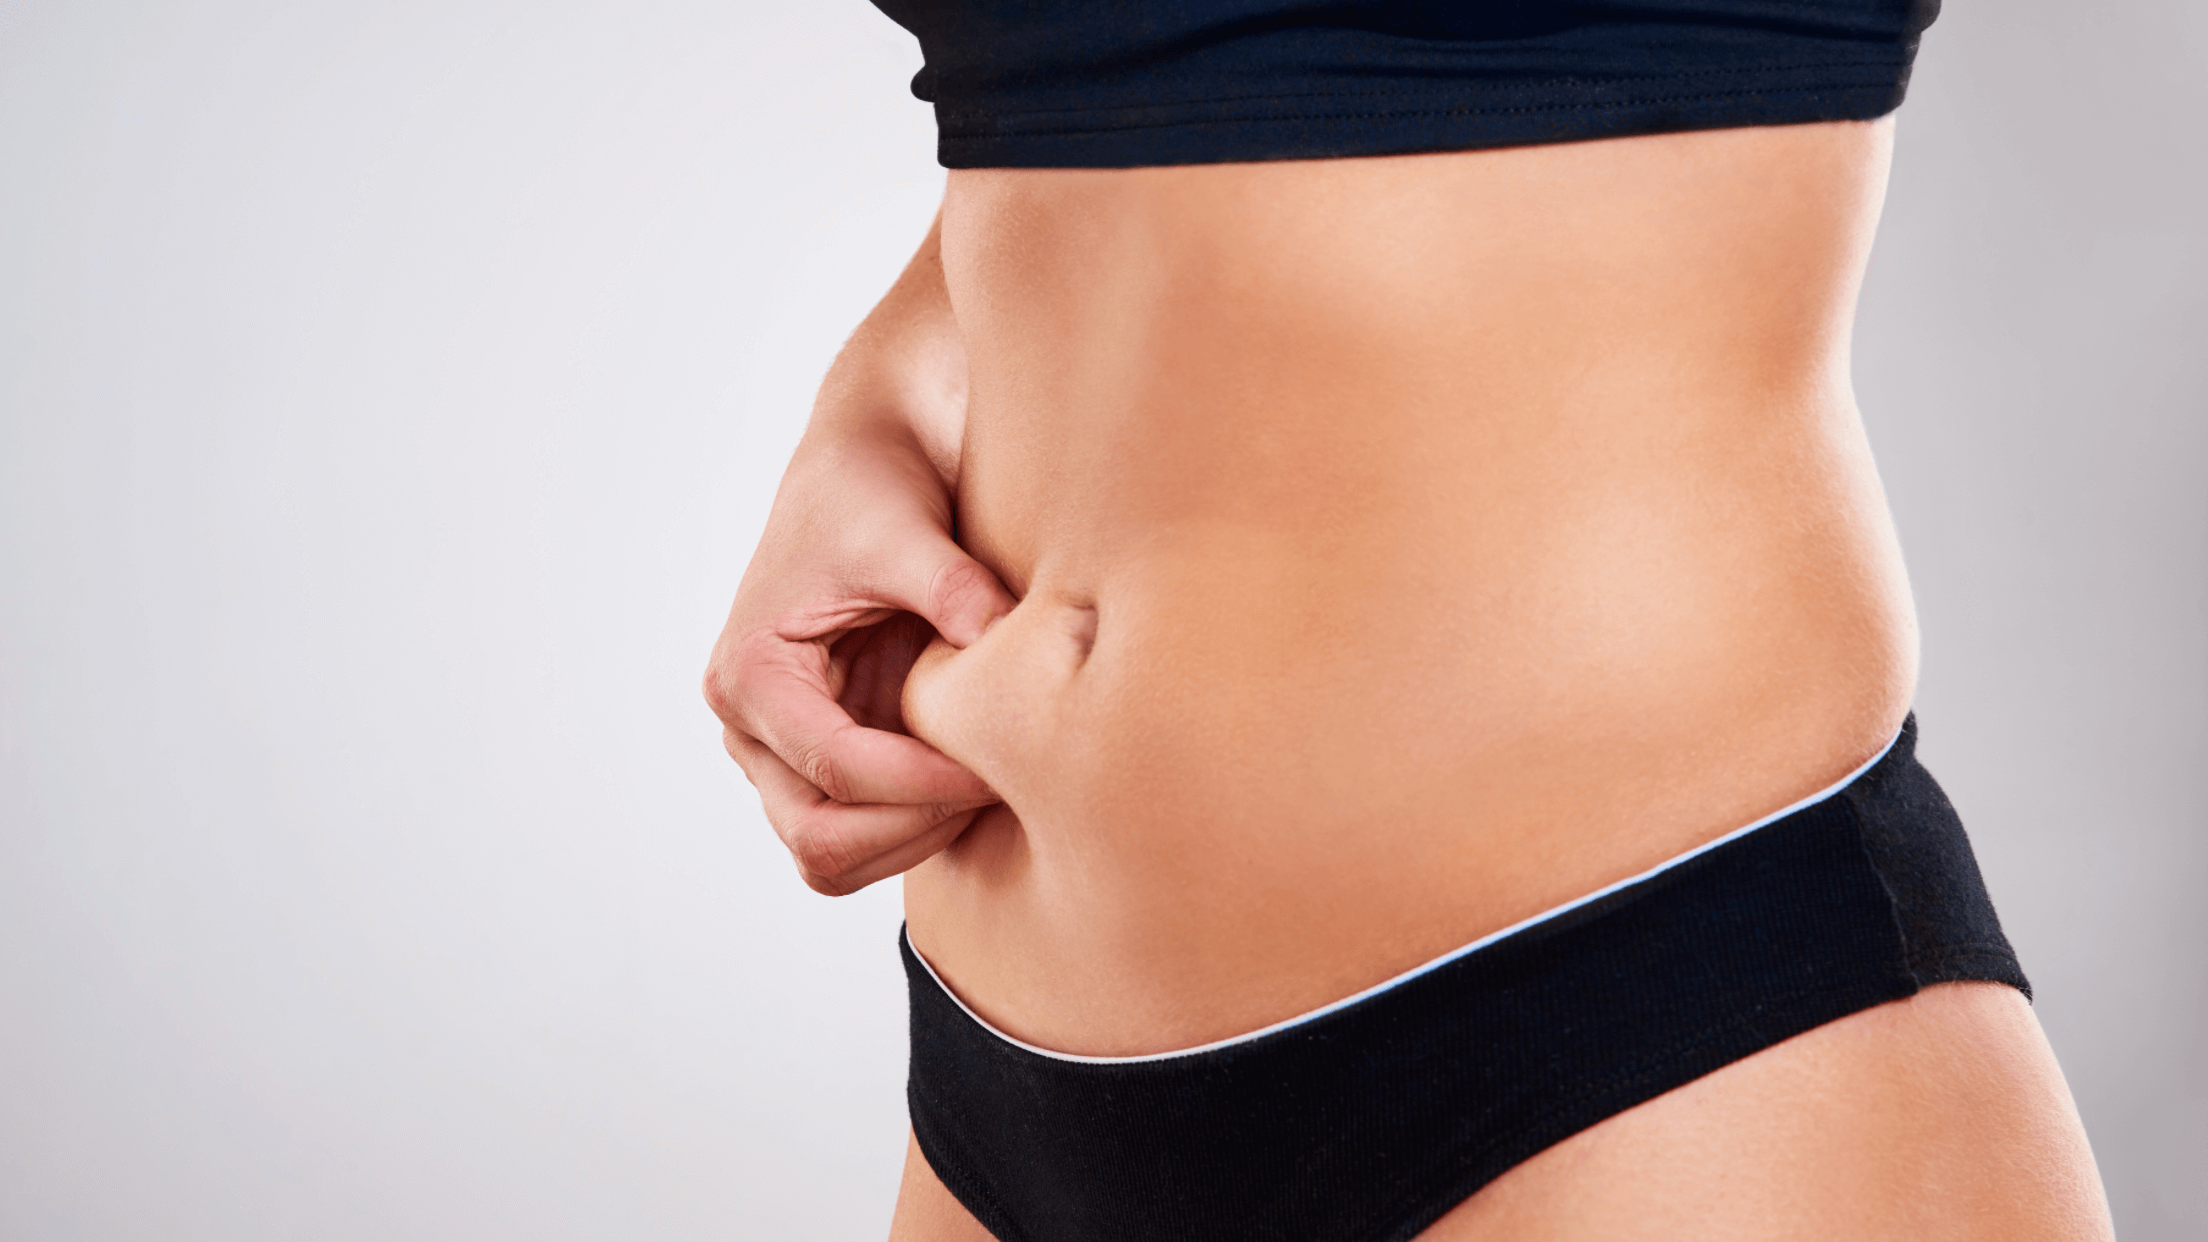 Five Tips To Prepare For Tummy Tuck Surgery